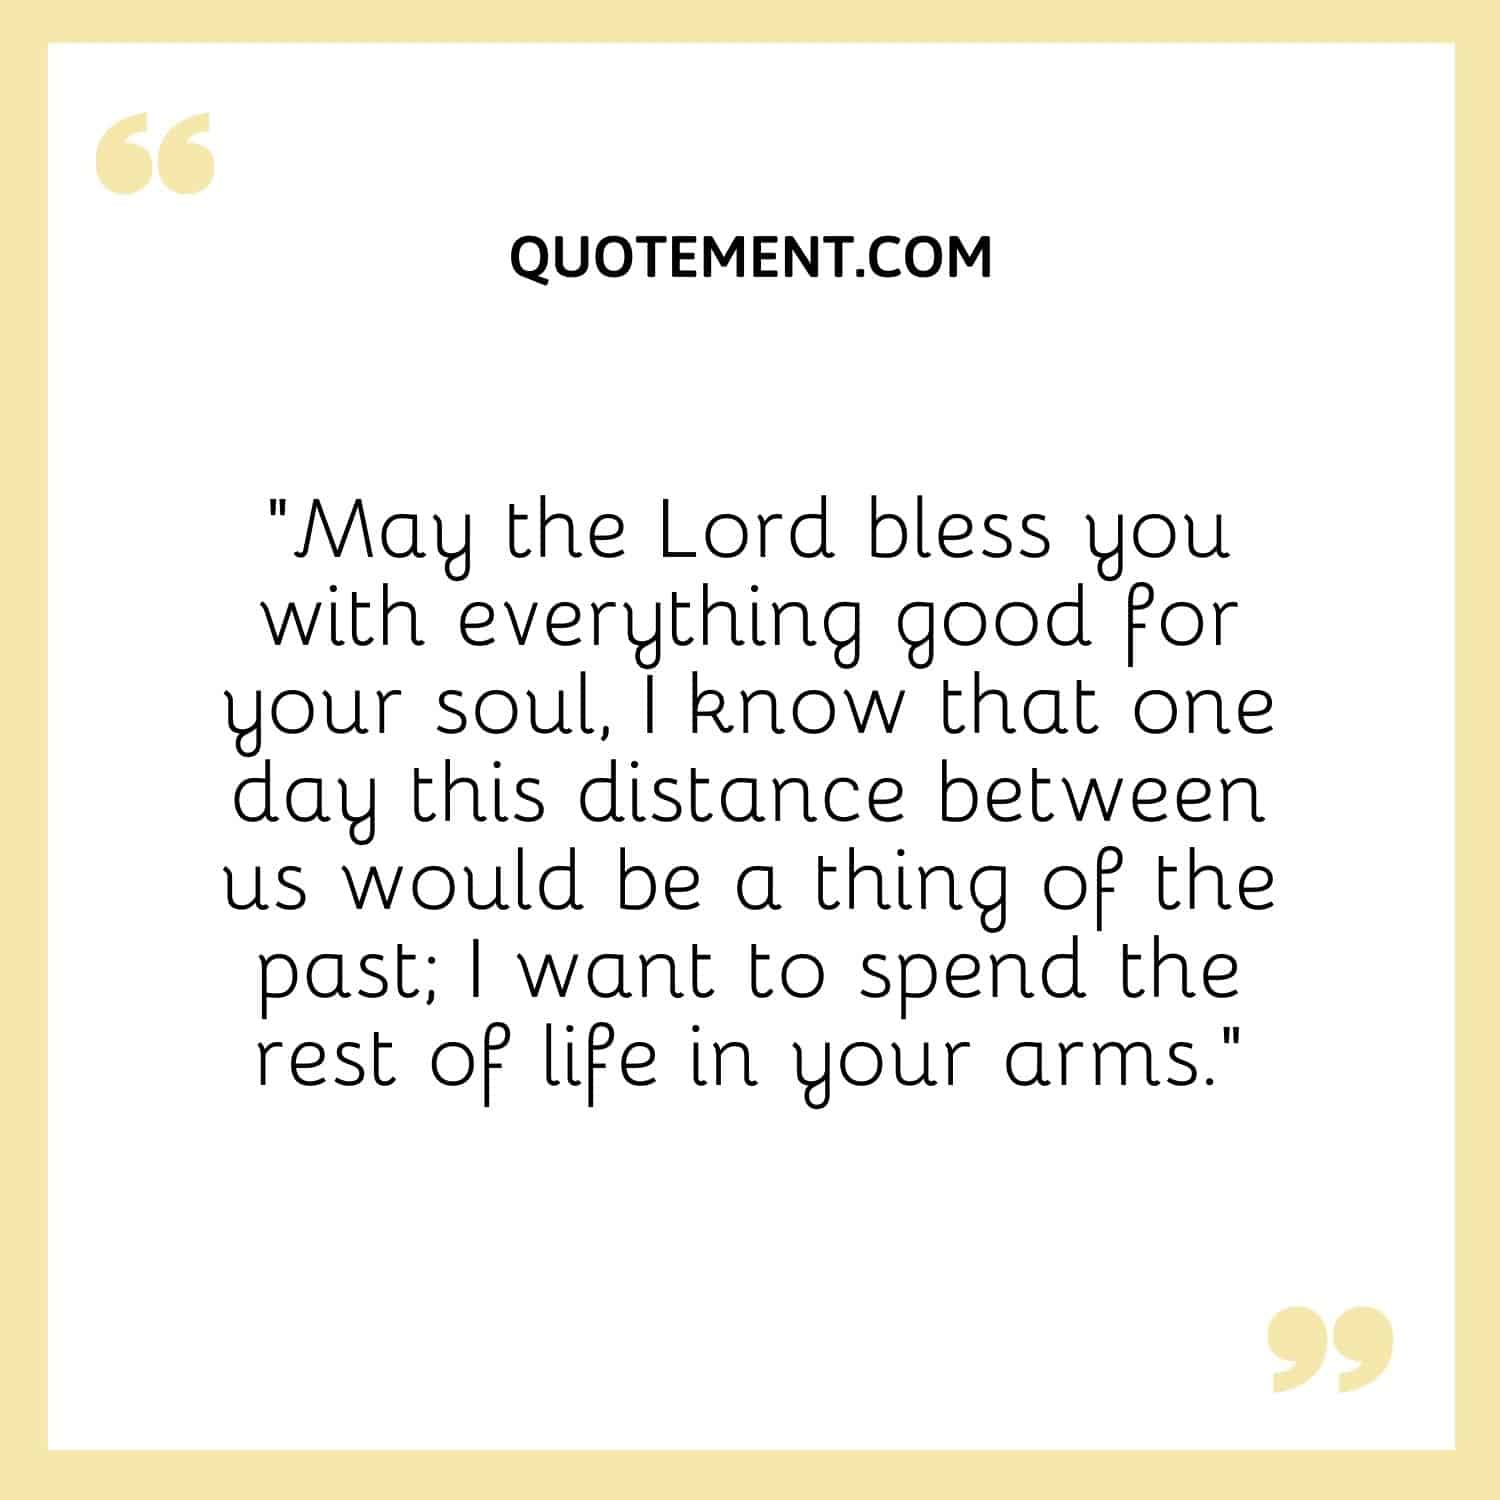 May the Lord bless you with everything good for your soul